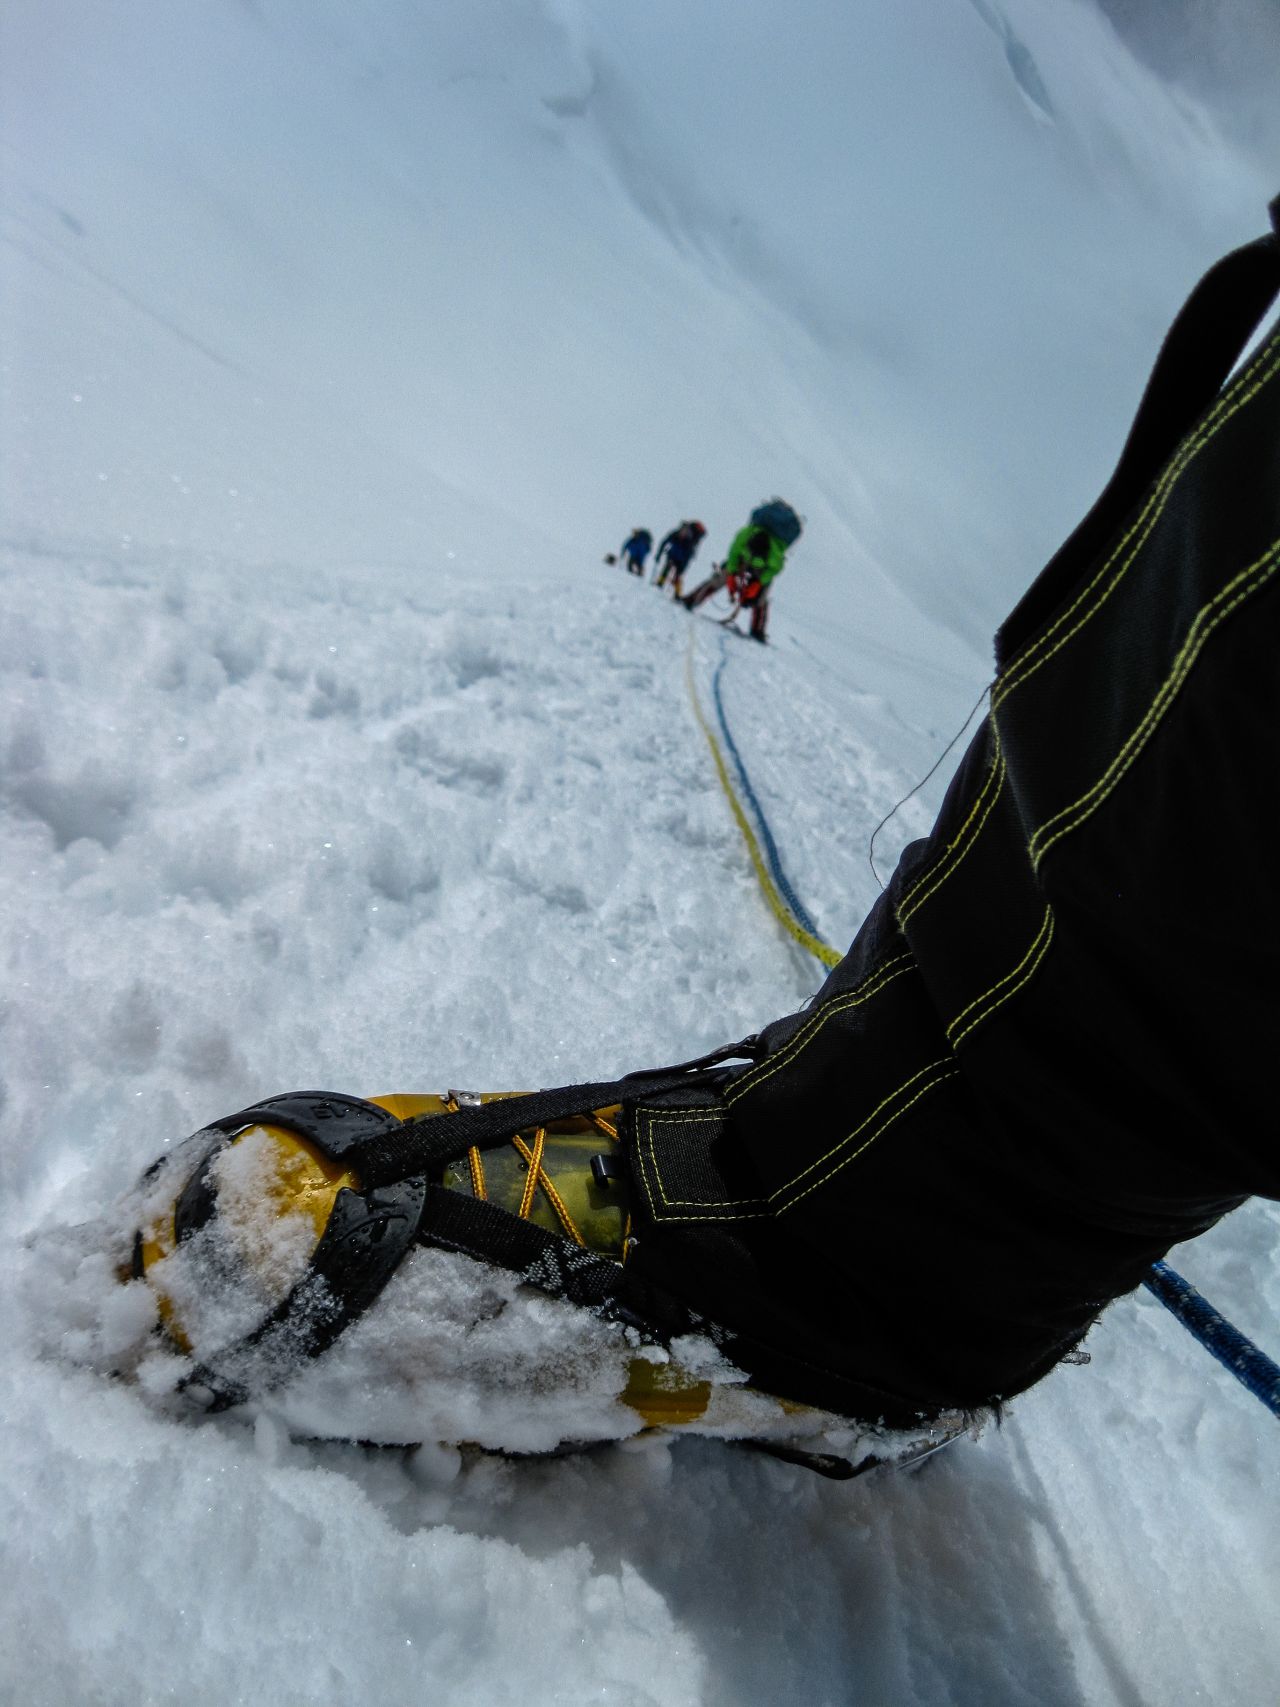 After leaving the advanced base camp, climbers clip themselves into a section of ropes attached to the snow and ice. These ropes, called fixed lines, allow climbers to safely ascend the steep and icy slope between 15,000 and 16,000 feet.